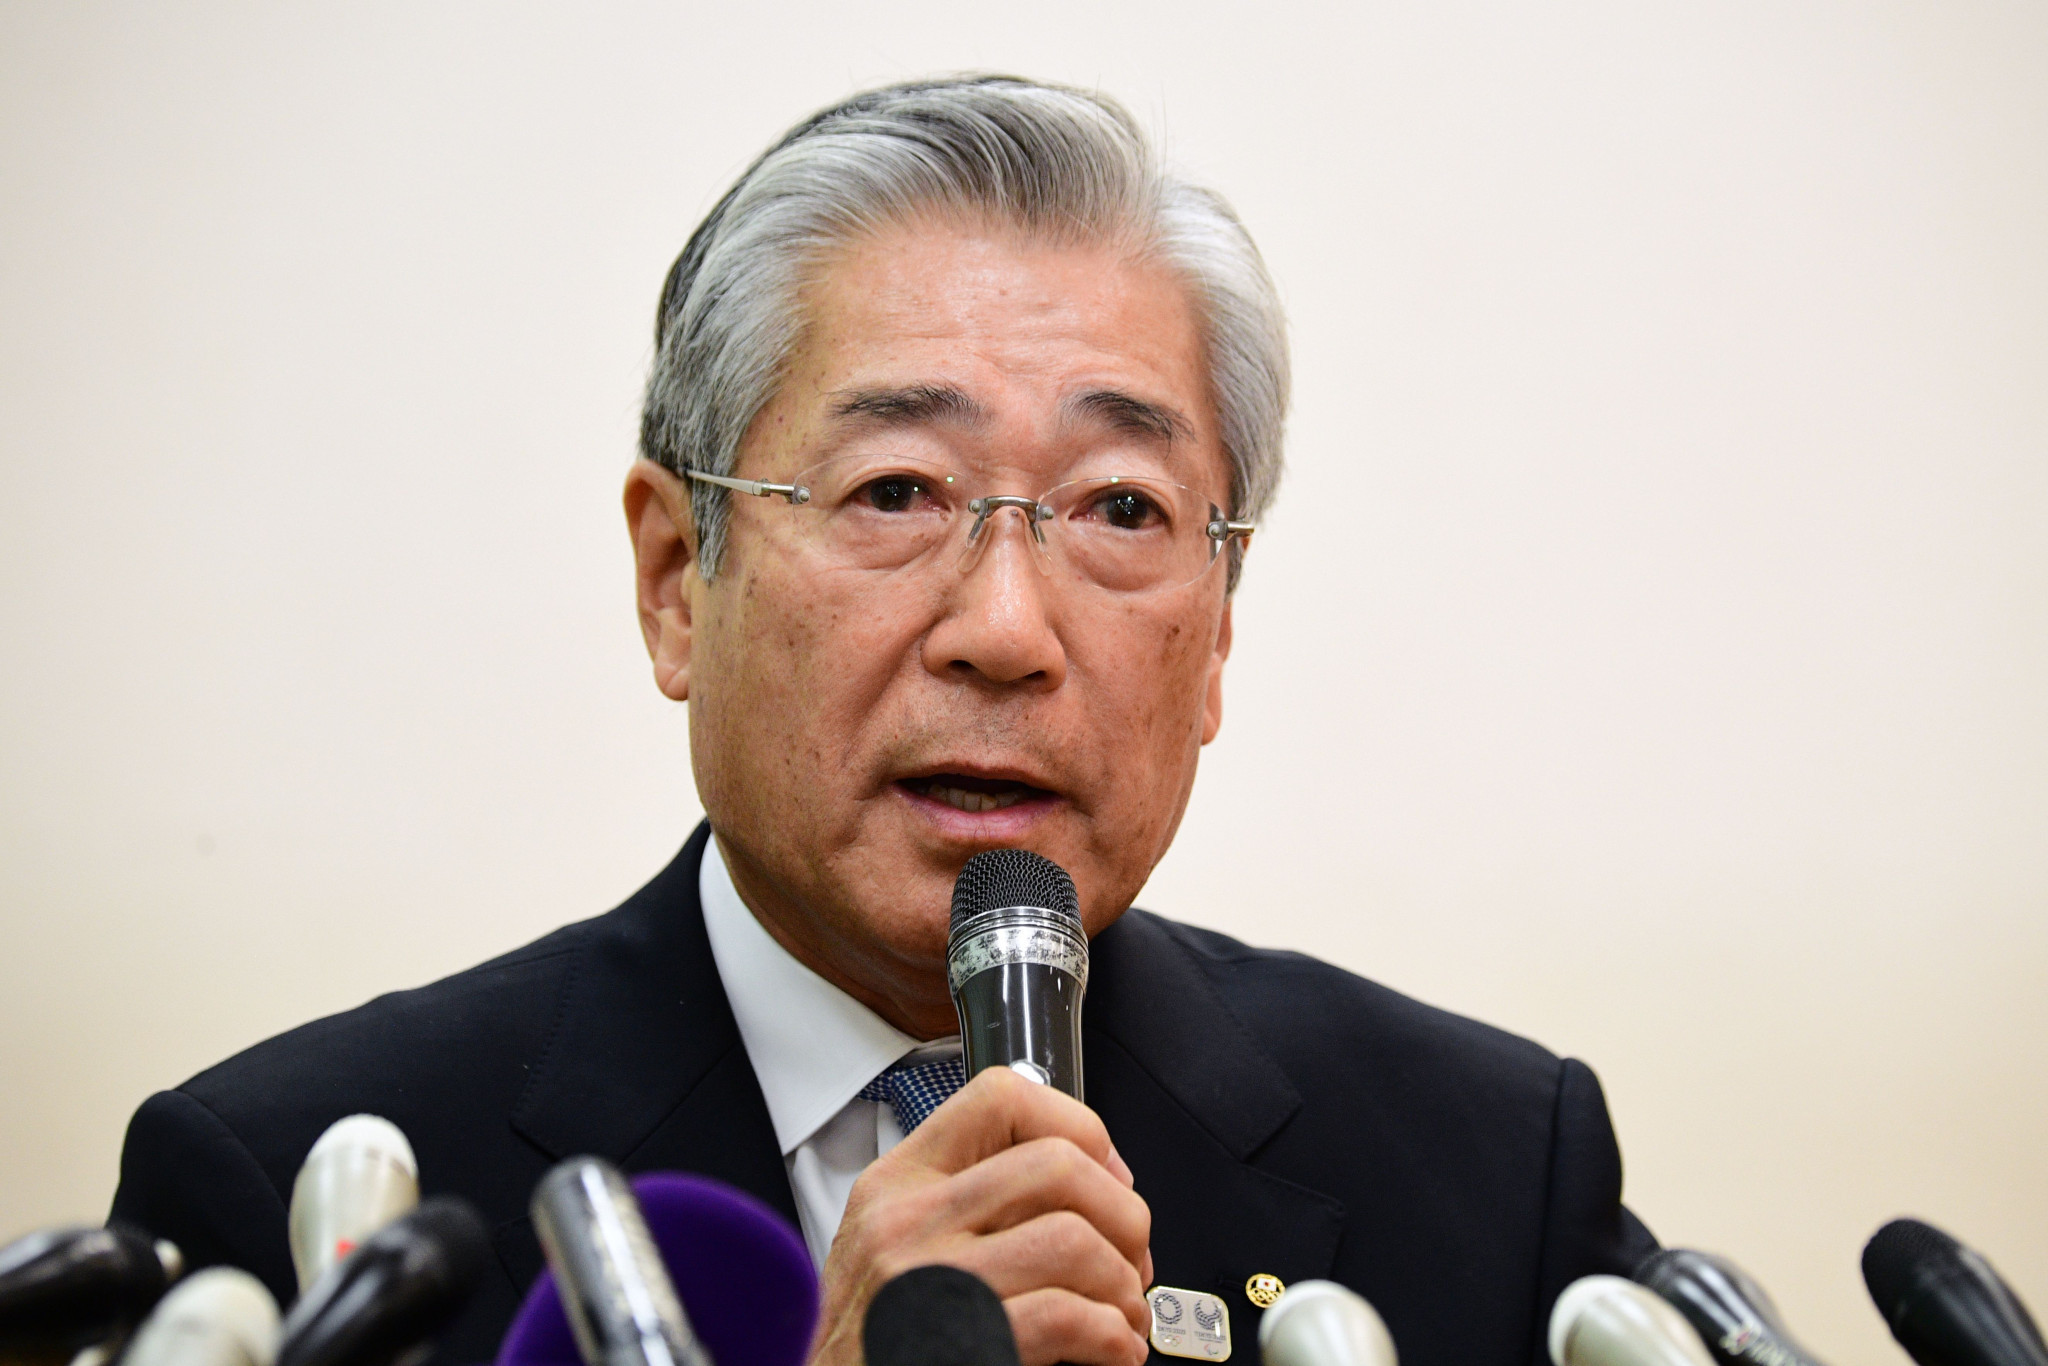 Tsunekazu Takeda appeared at a press conference to deny allegations of corruption ©Getty Images